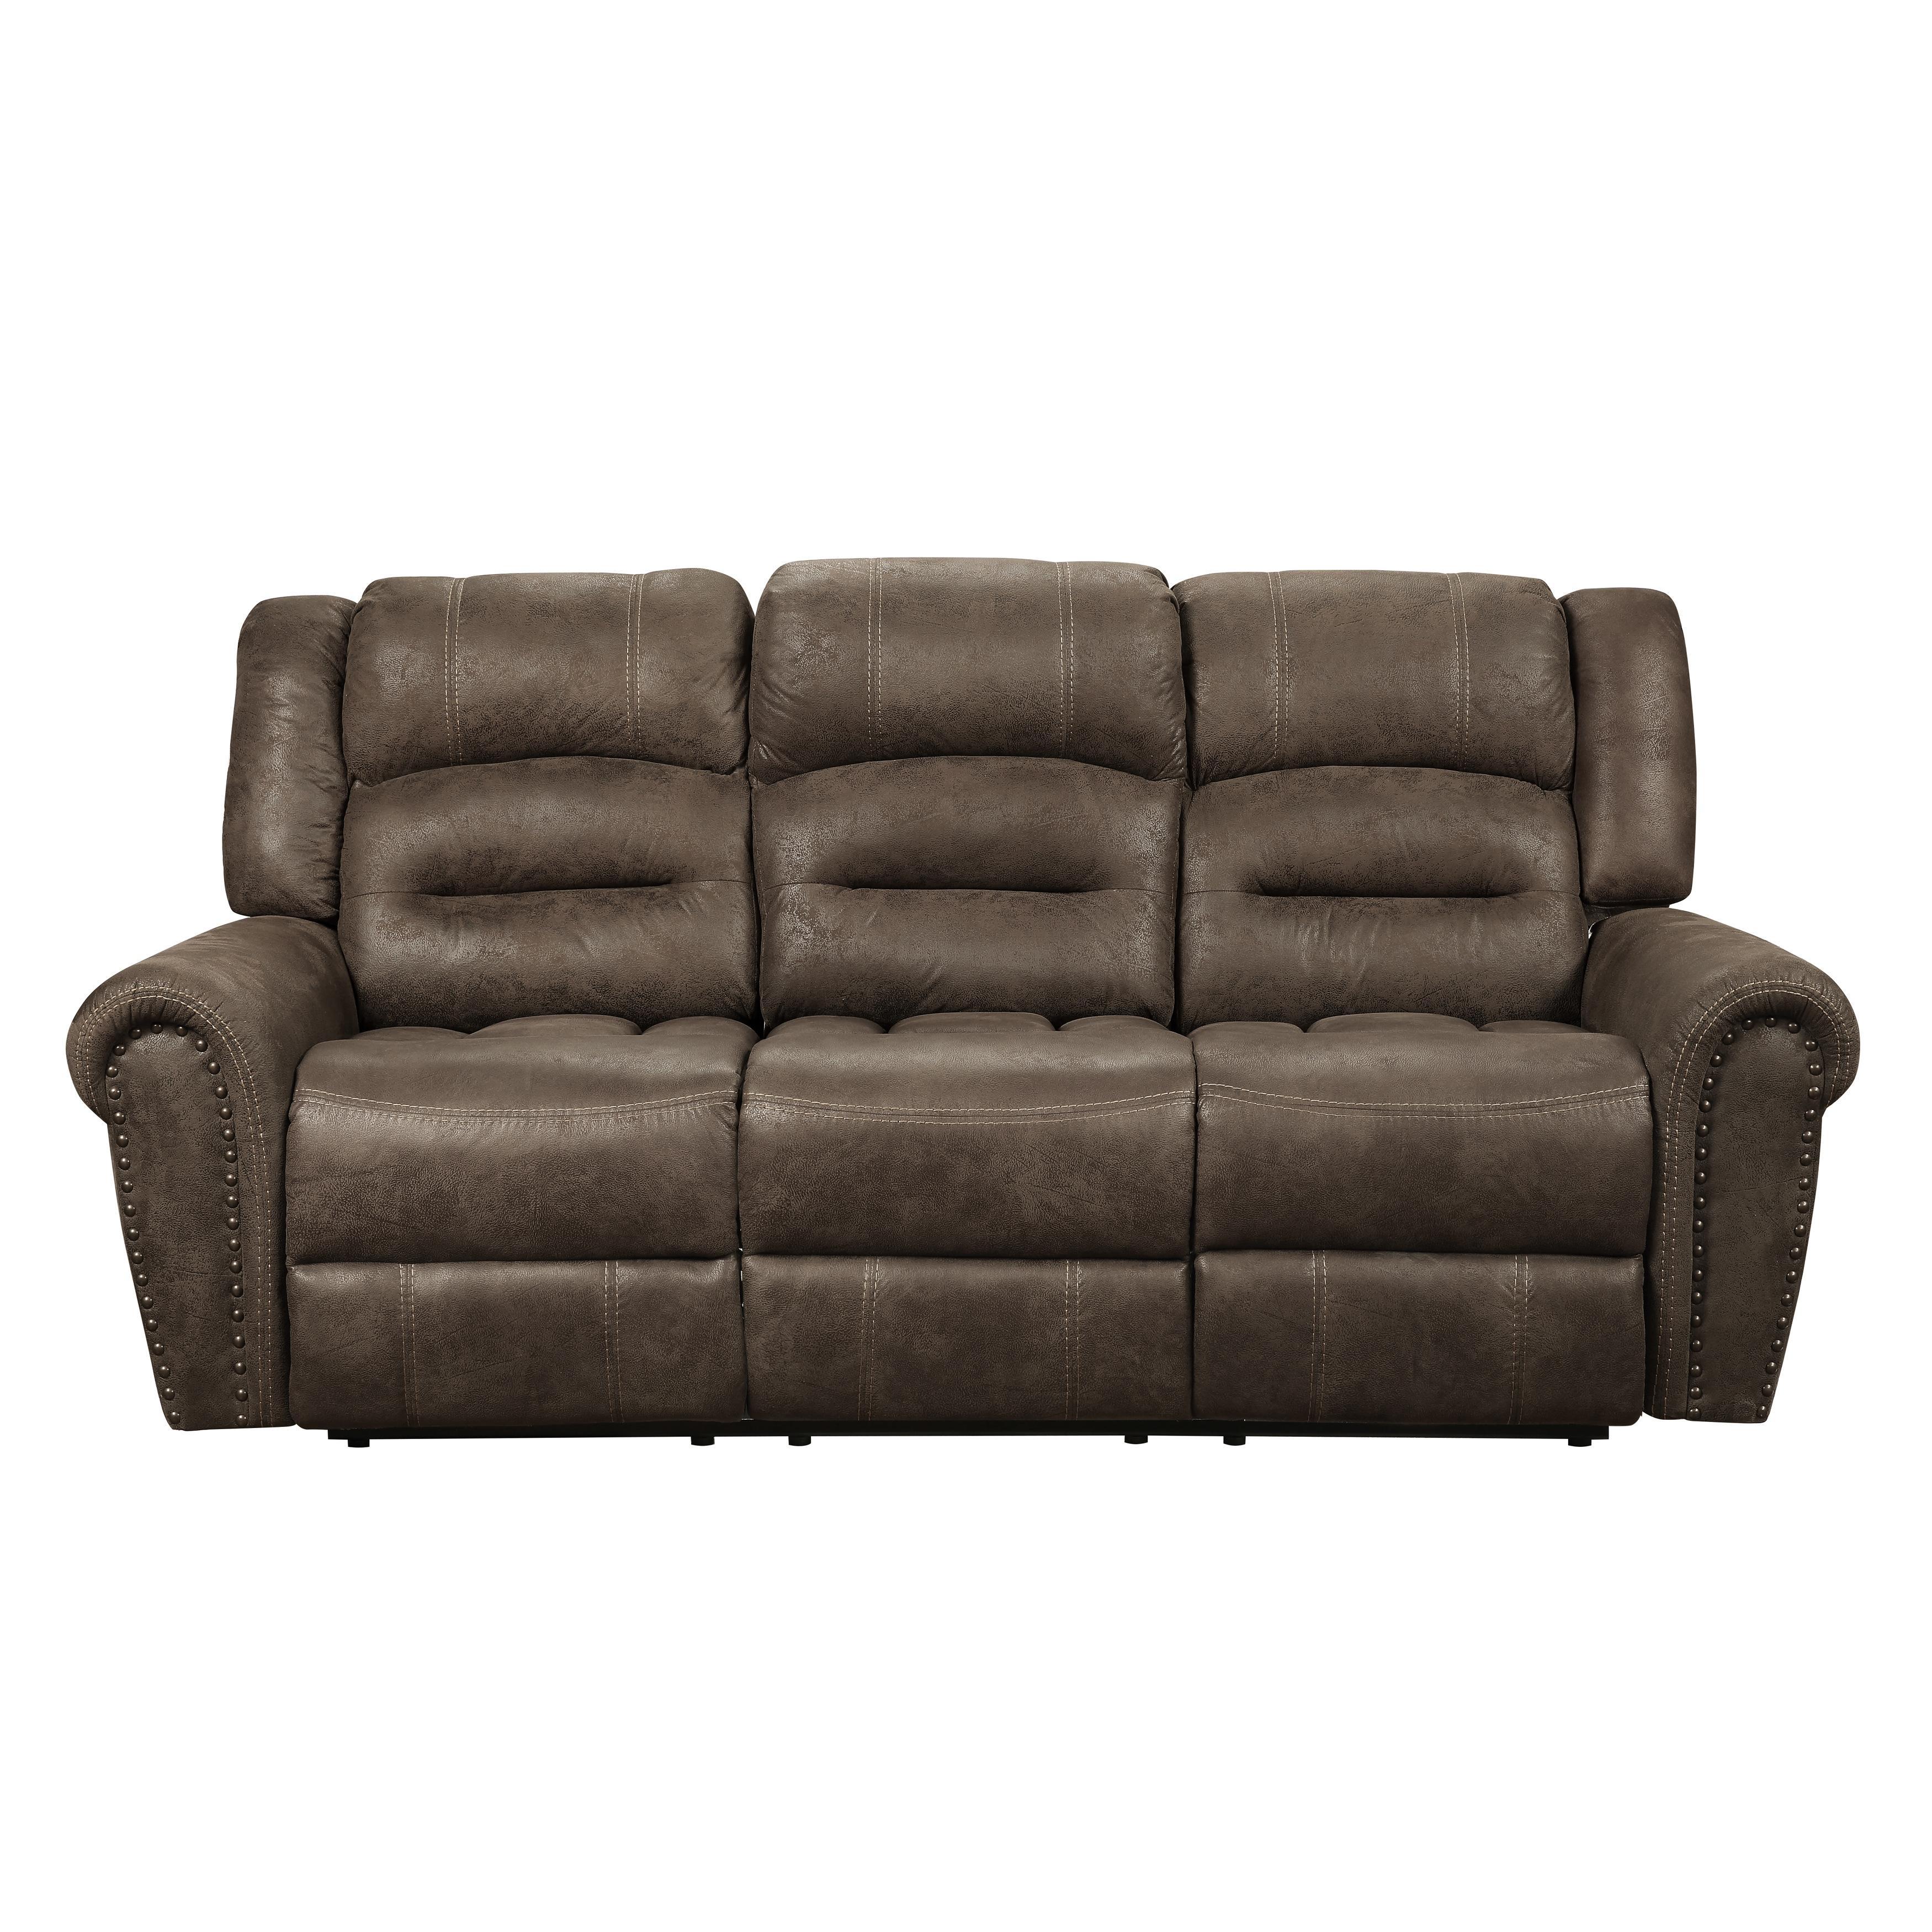 Transitional Reclining Sofa 9467BR-3 Creighton 9467BR-3 in Brown Microfiber